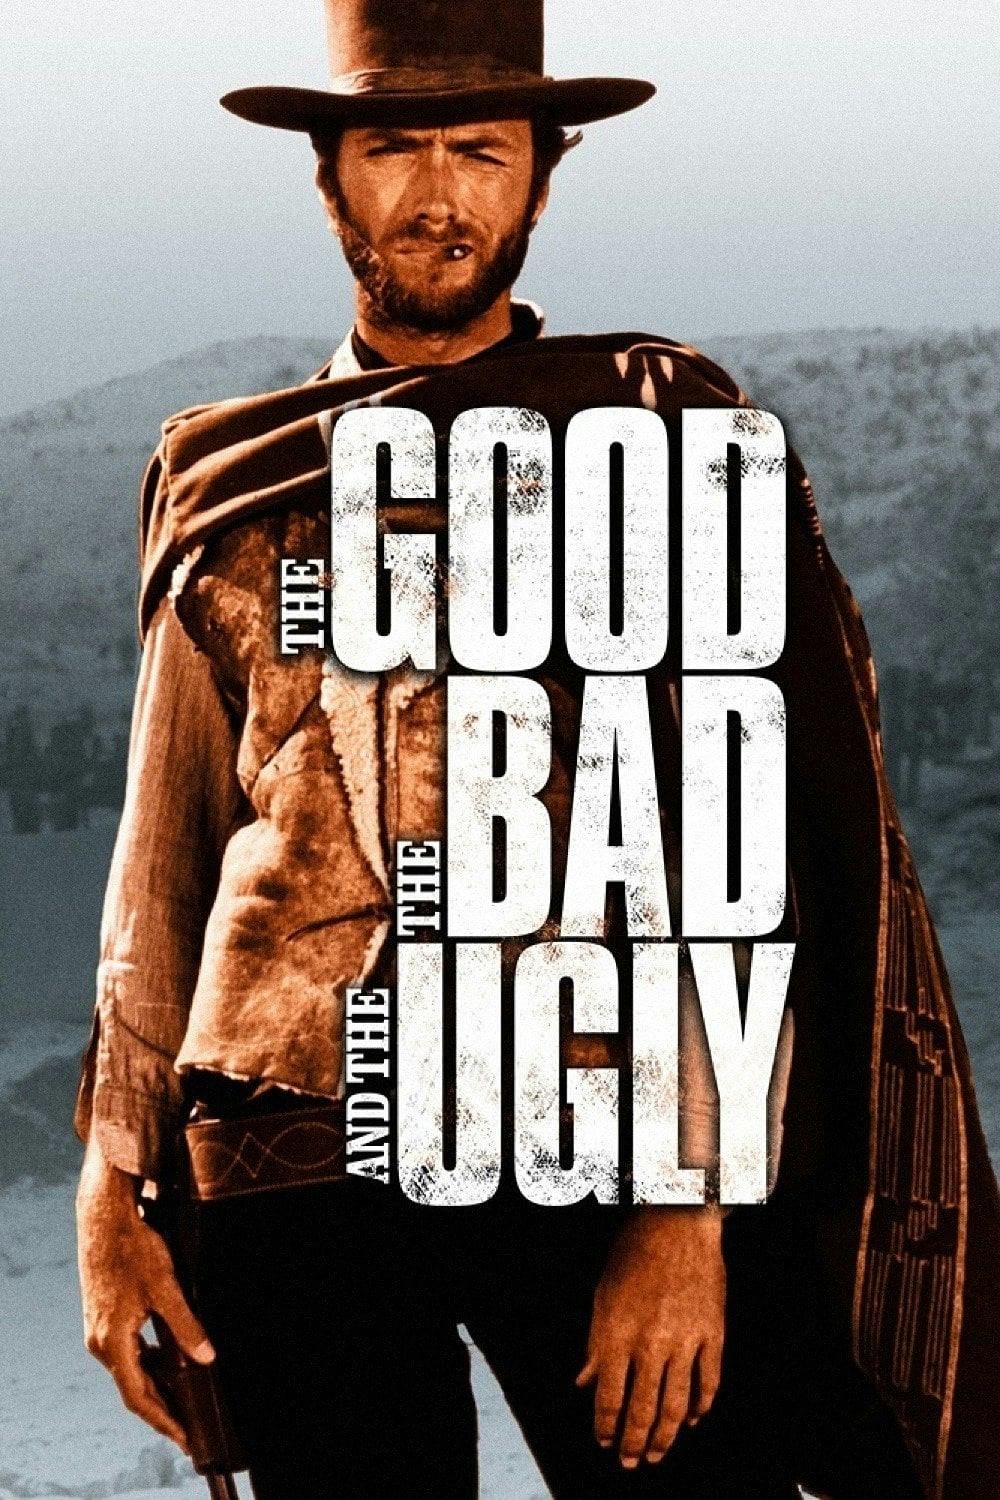 Movie poster of "The Good, the Bad and the Ugly"